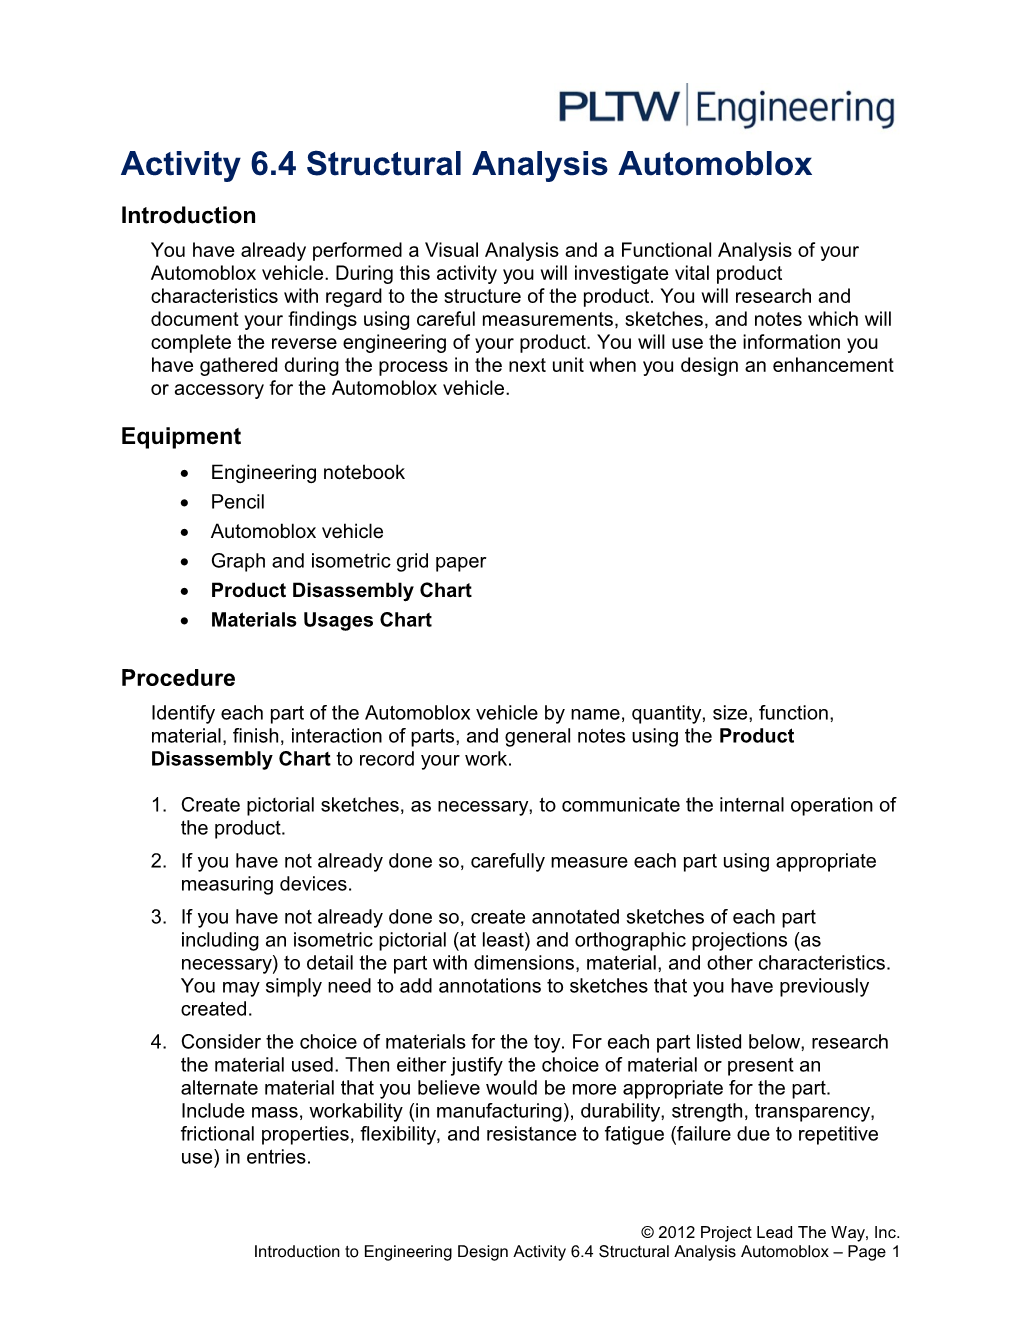 Activity 6.4 Structural Analysis Automoblox